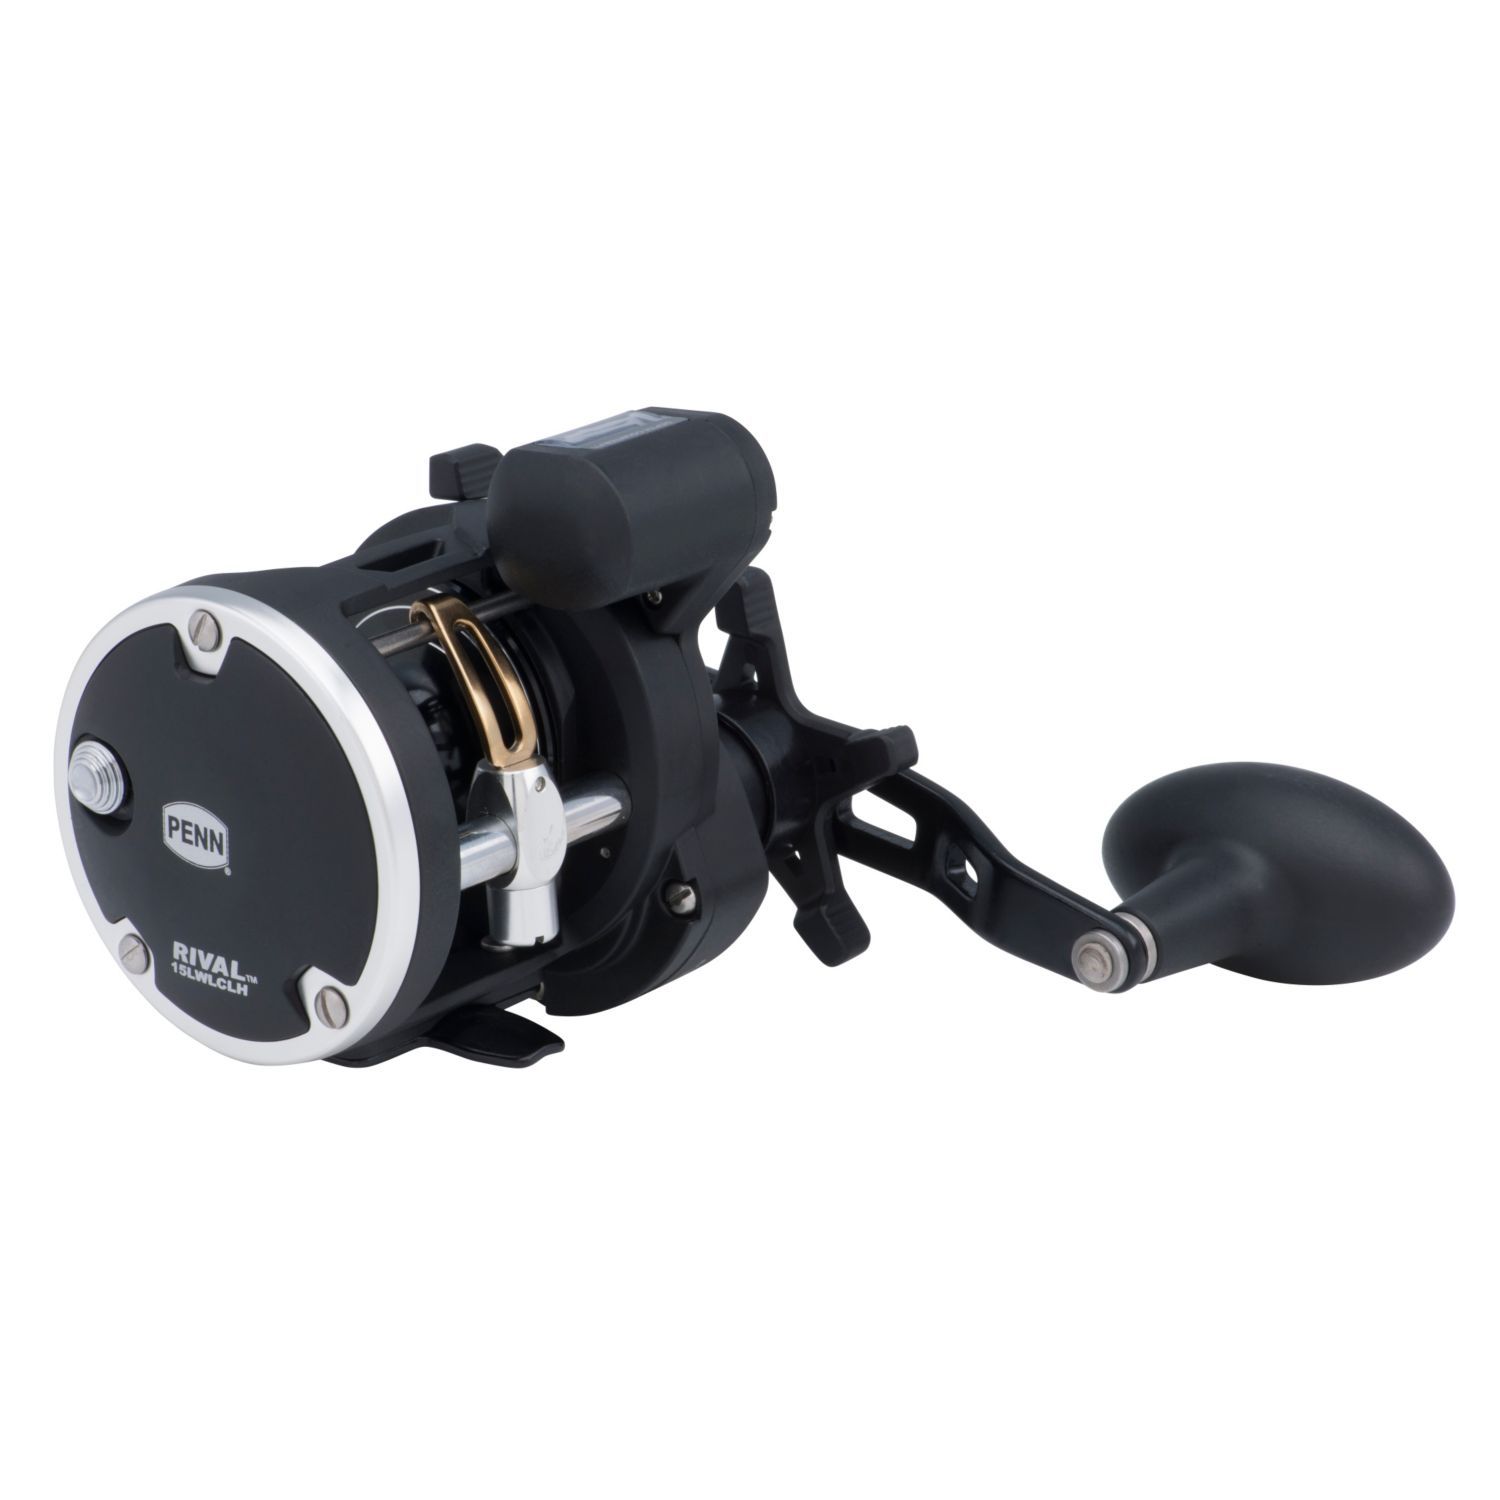 Penn Rival 20 LW level wind right hand conventional fishing reel 